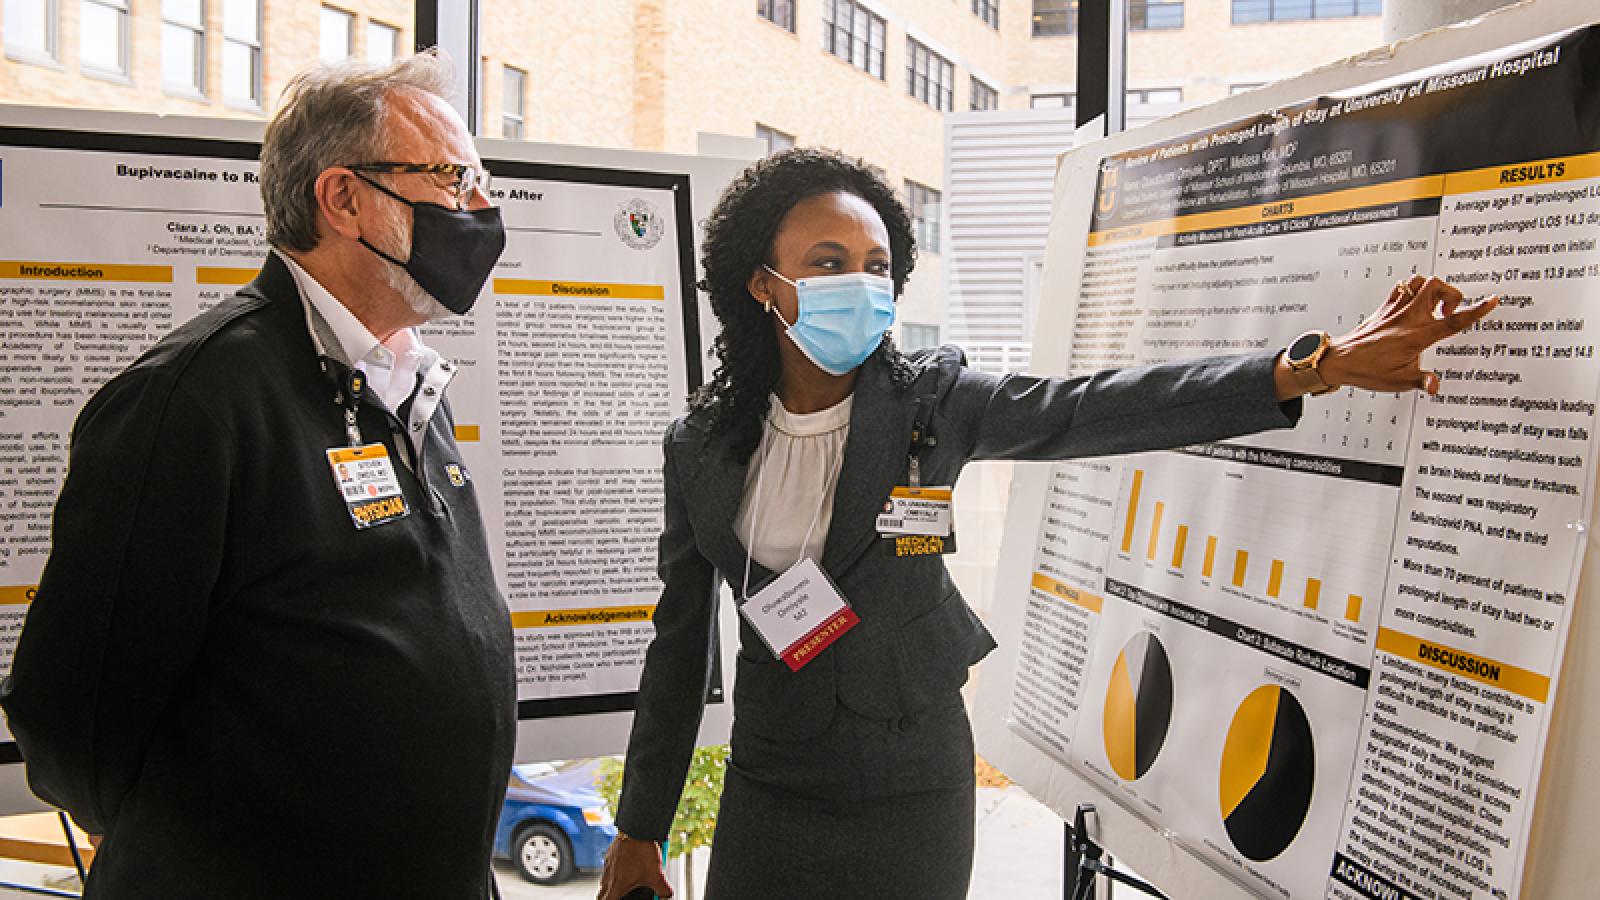 2021 Health Sciences Research Day presentation